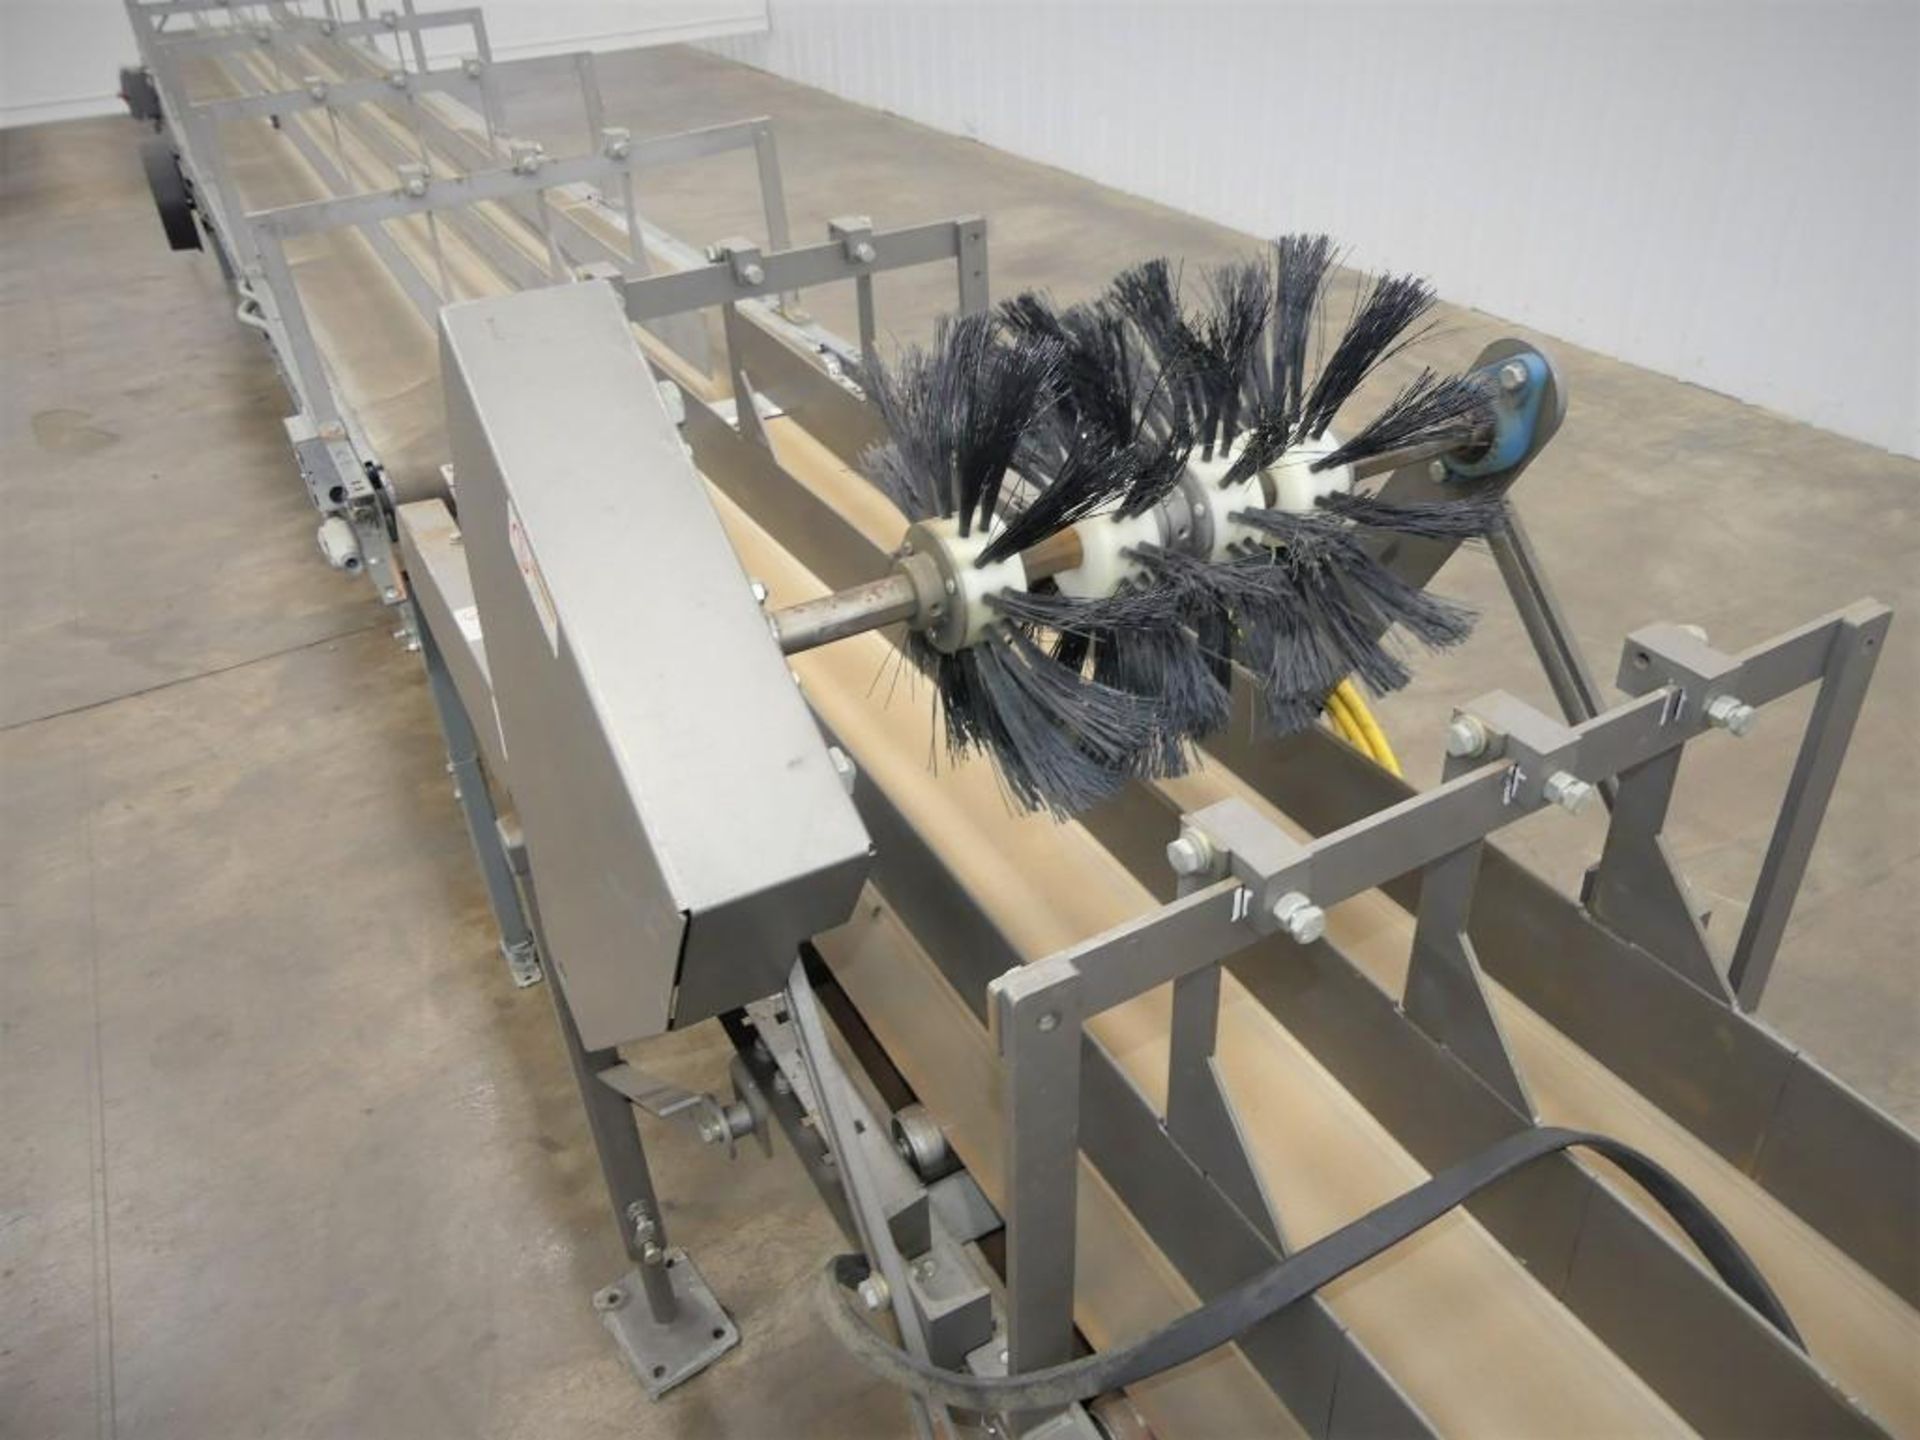 Pearson BE60 6-Pack Beverage Carrier Erector with Twin Lane Conveyor - Image 12 of 21